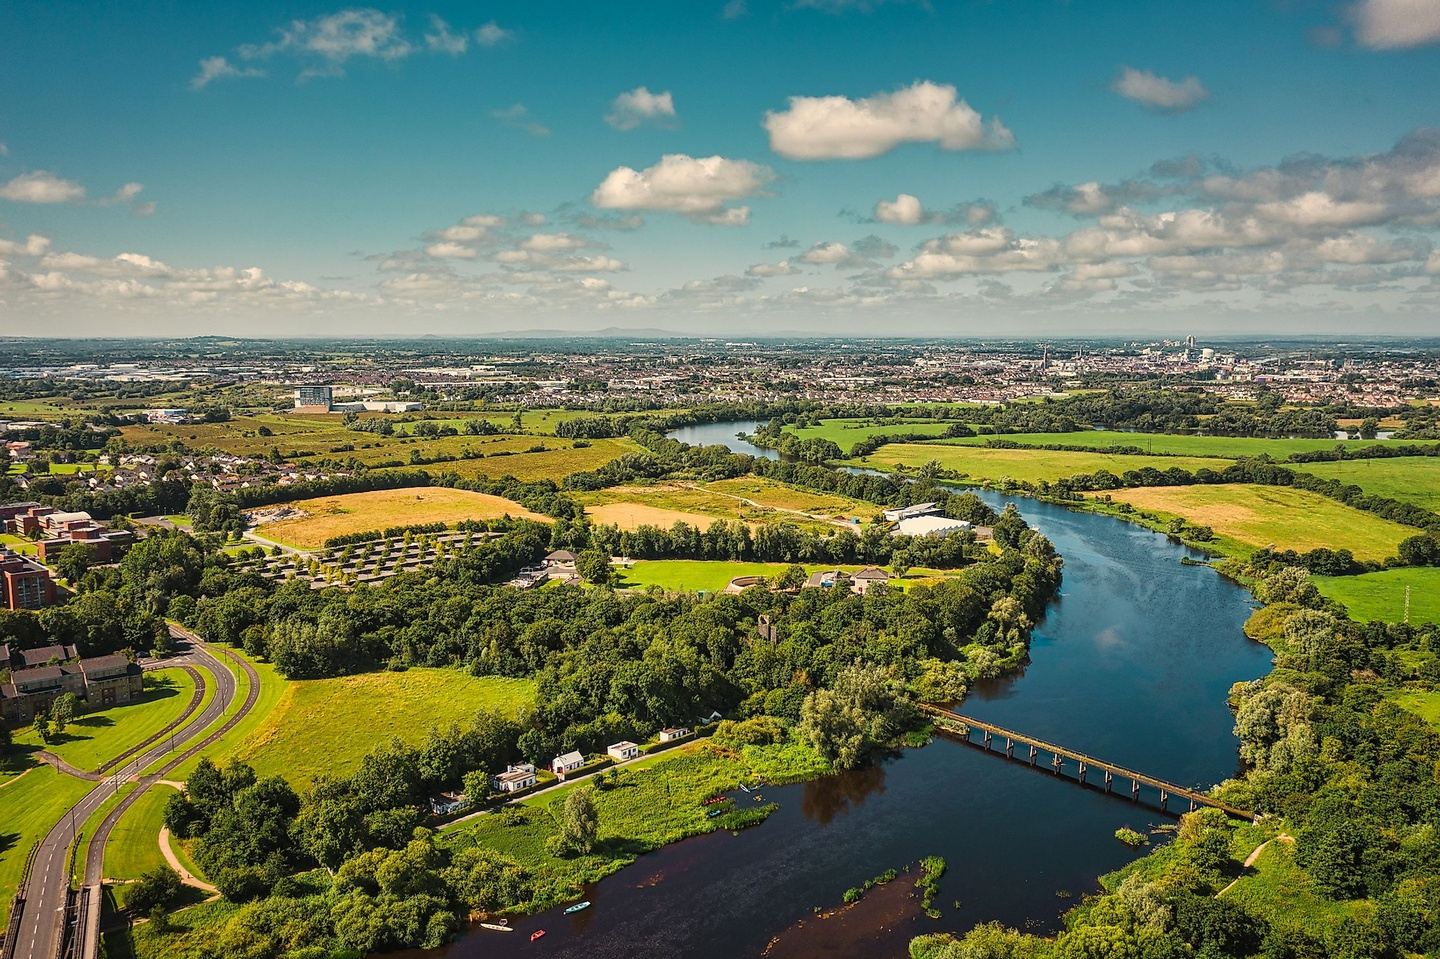 Cruise the River Shannon